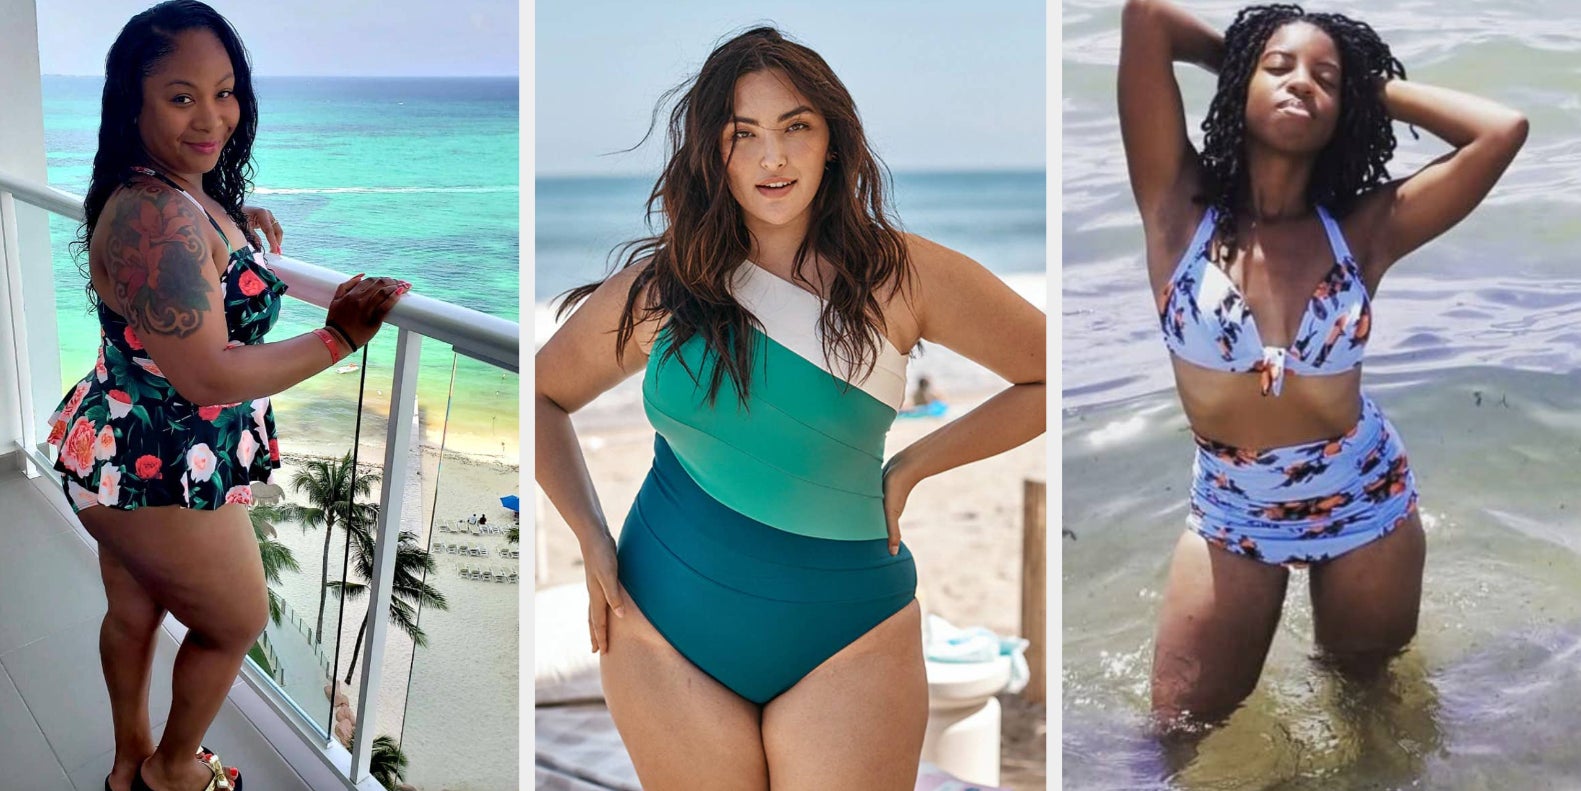 Butt Ruffle Bathing Suits Are the New Summer 2021 Swimwear Trend